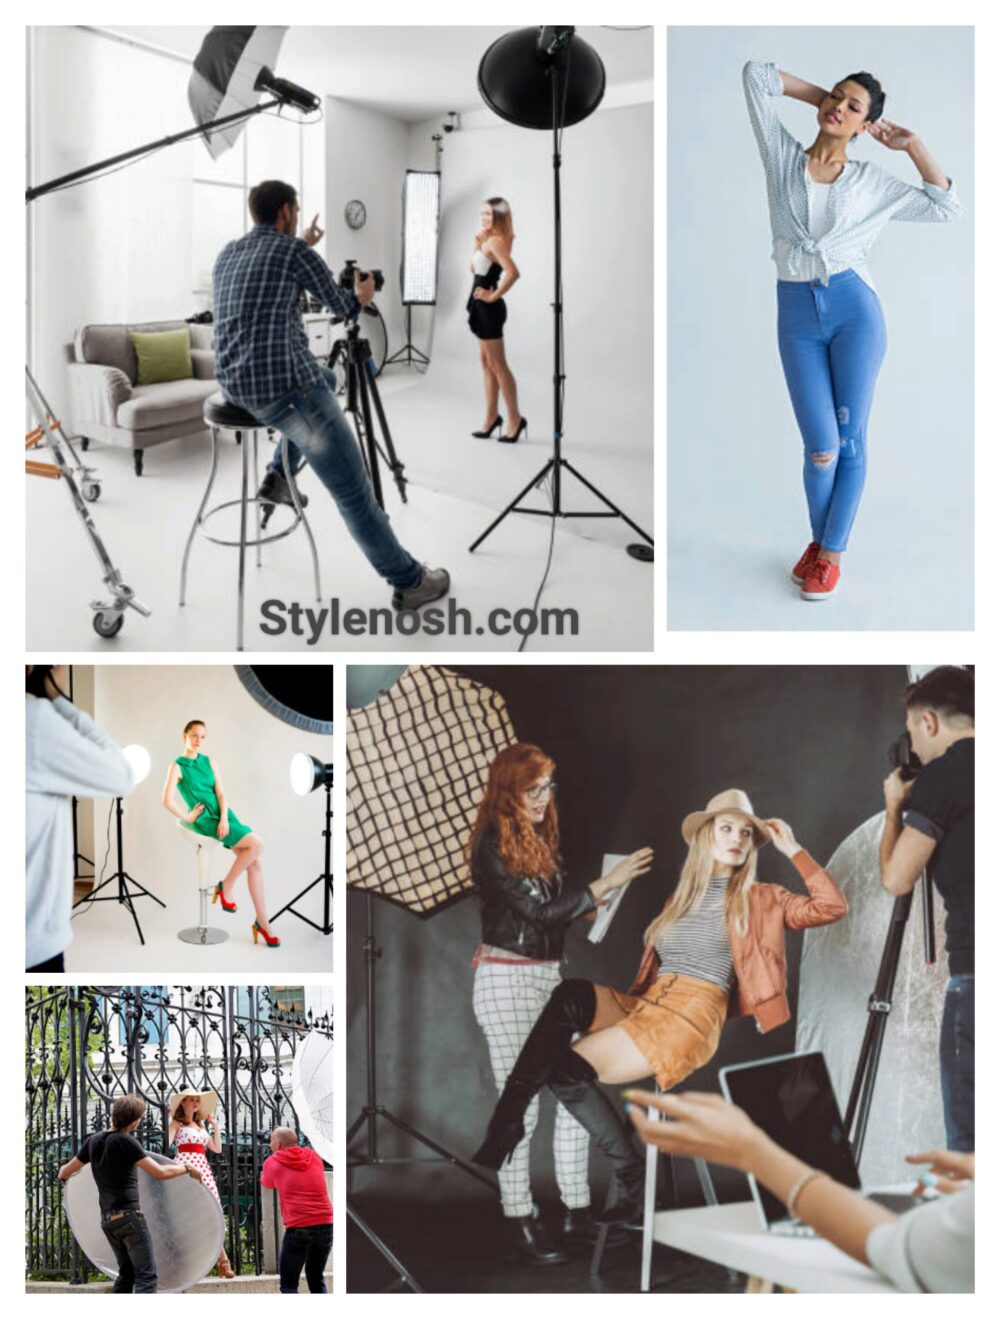 Choose the Best Models For Fashion Photoshoots